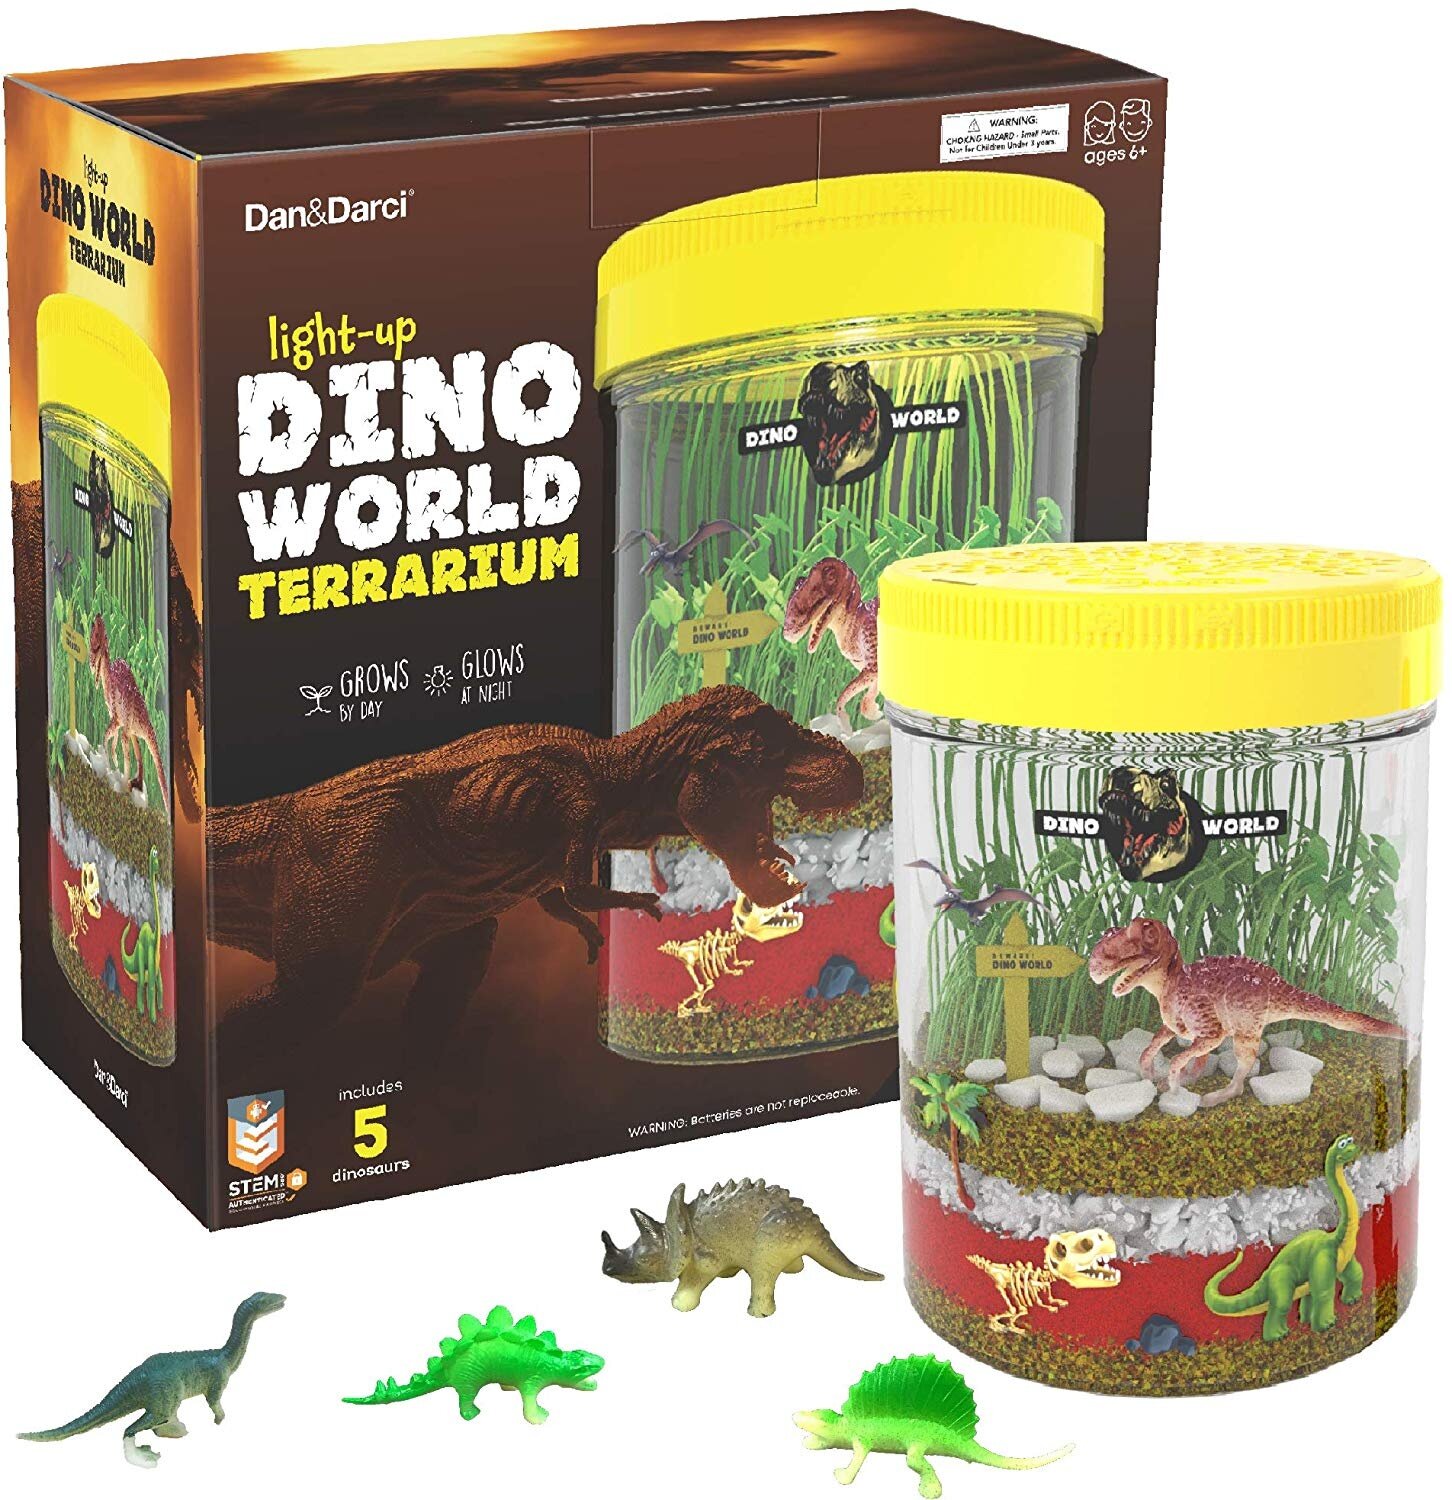 Plant Growing Kit Glows at Night STEM Science Kit for Boys and Girls Age 3 4 5 Light-up Terrarium Kit for Kids with 6 Dinosaur Toys 6 7 Create Your Customized Mini Dino World Garden 8-12 